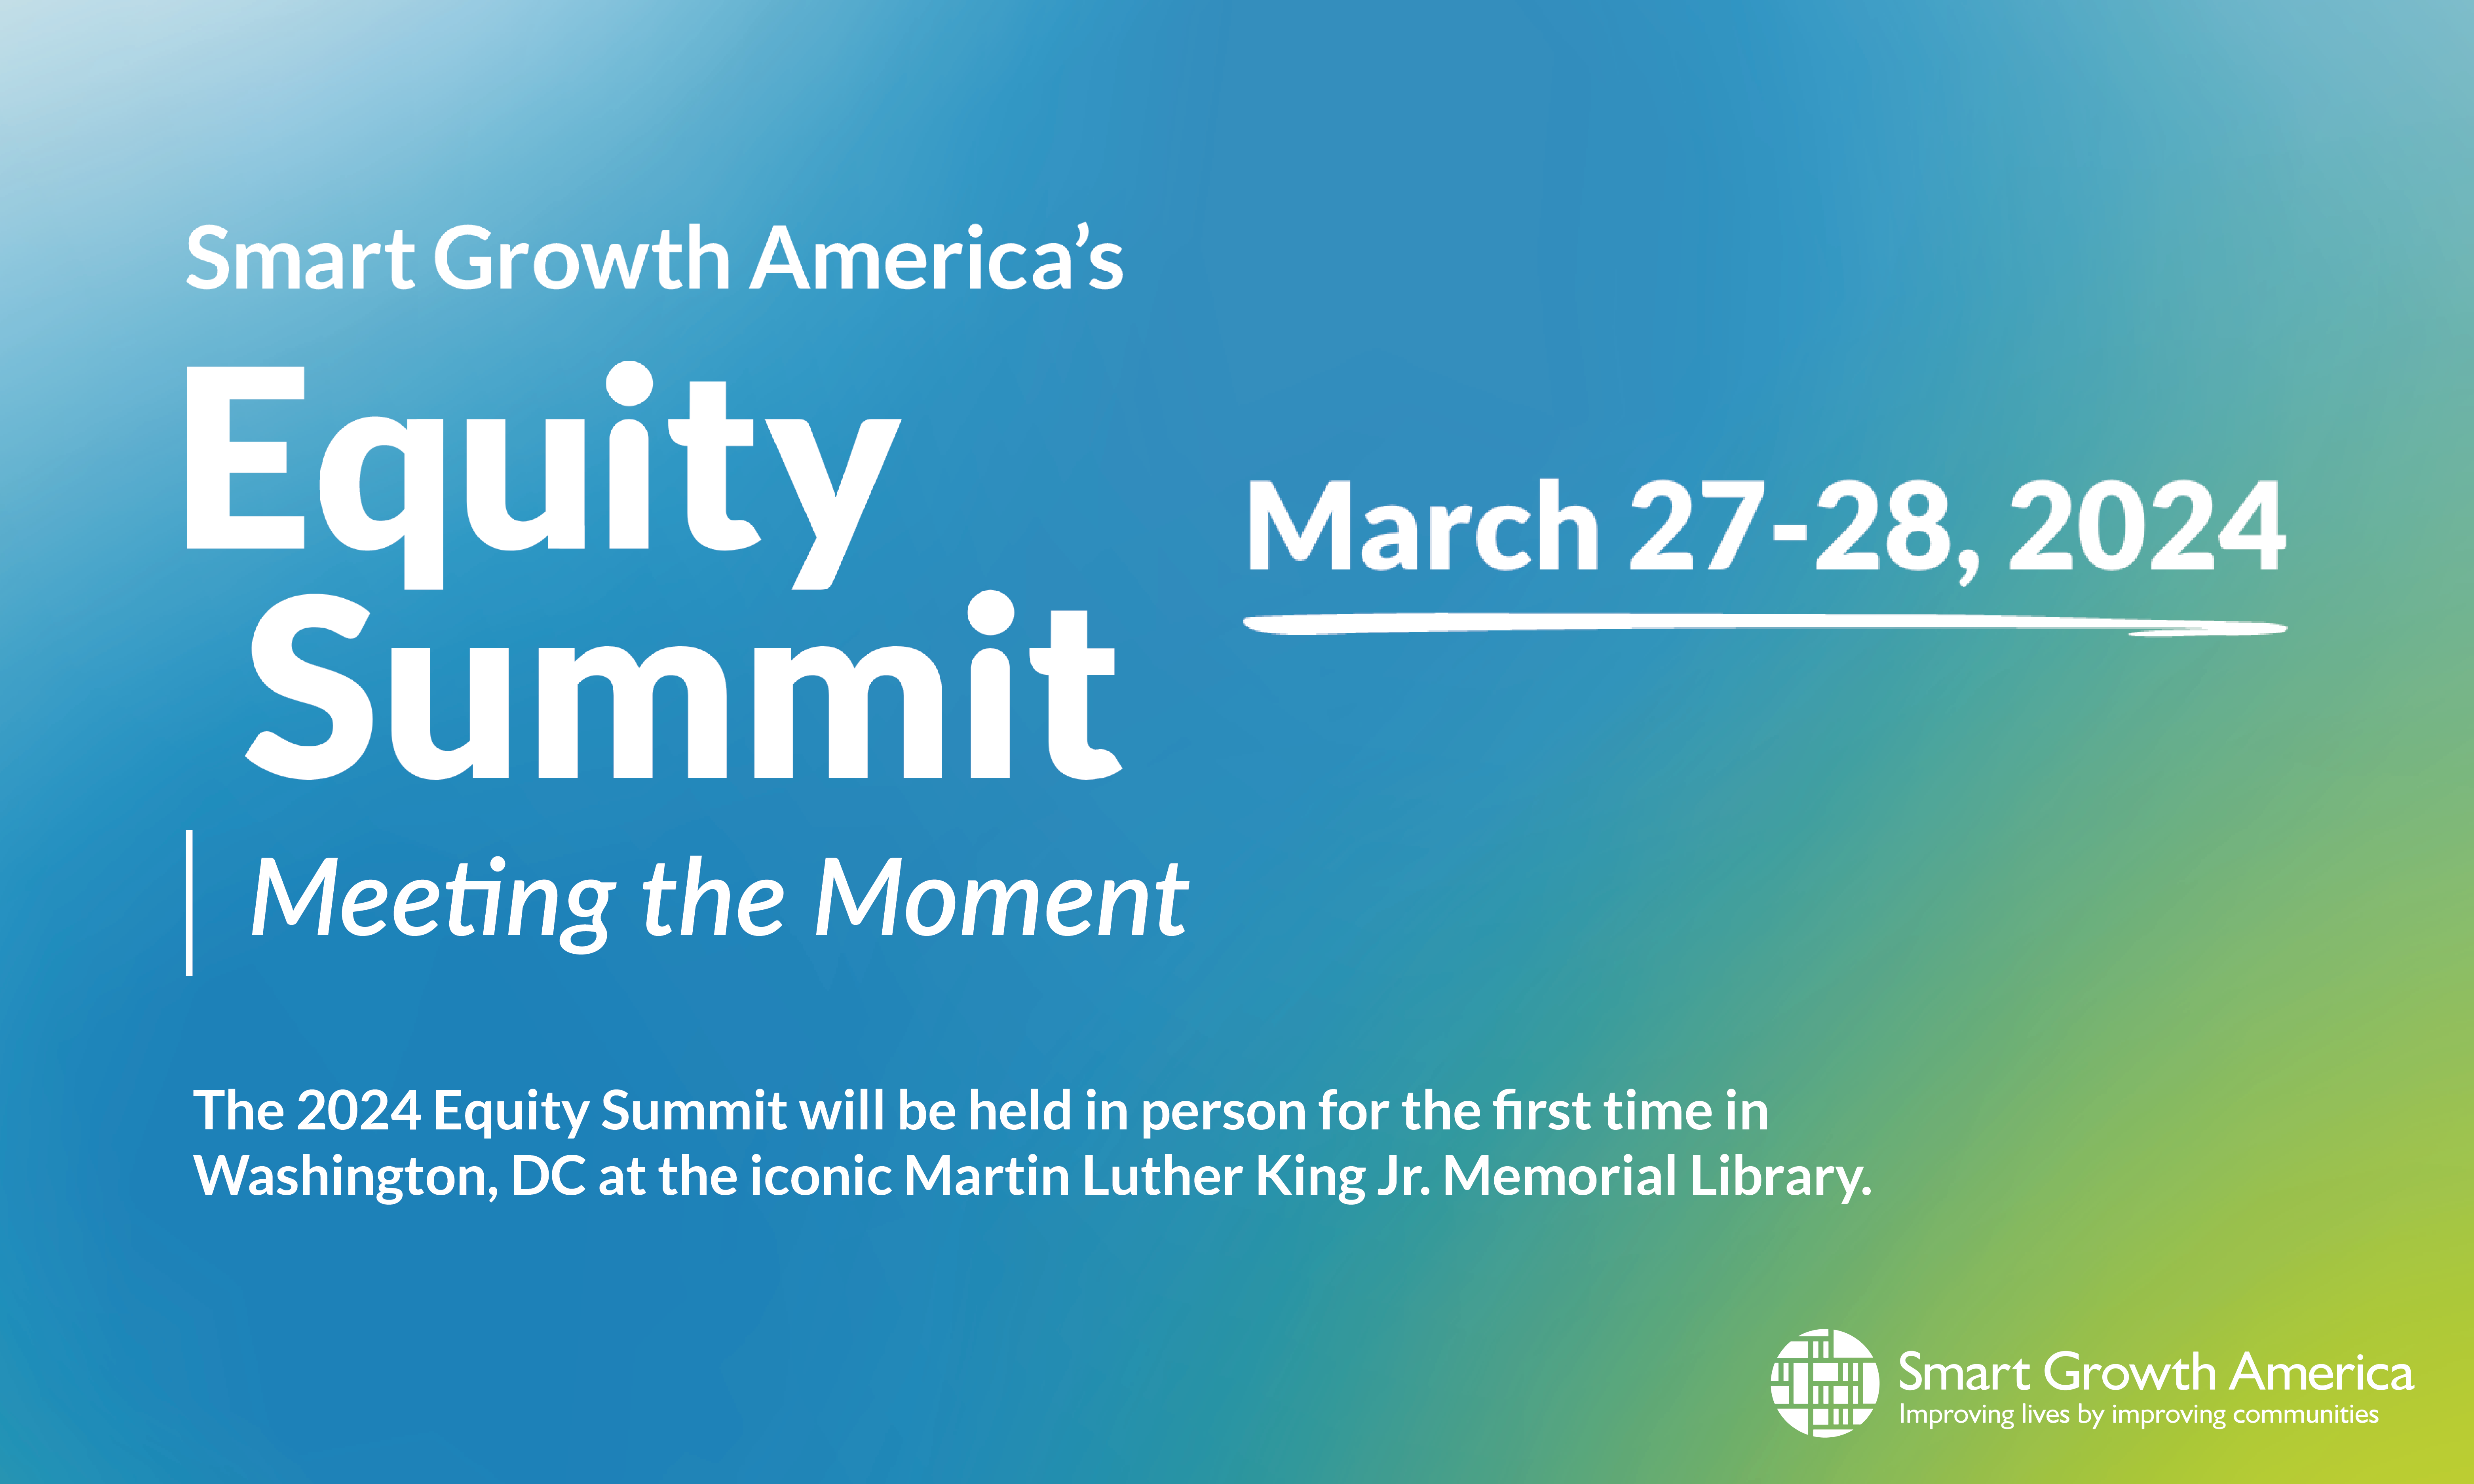 A blue and green graphic with white text reads Smart Growth America's Equity Summit: Meeting the Moment March 27-28 2024. Underneath, smaller text explains that the summit will be hosted at the historical MLK Library in Washington DC for the first time in person.